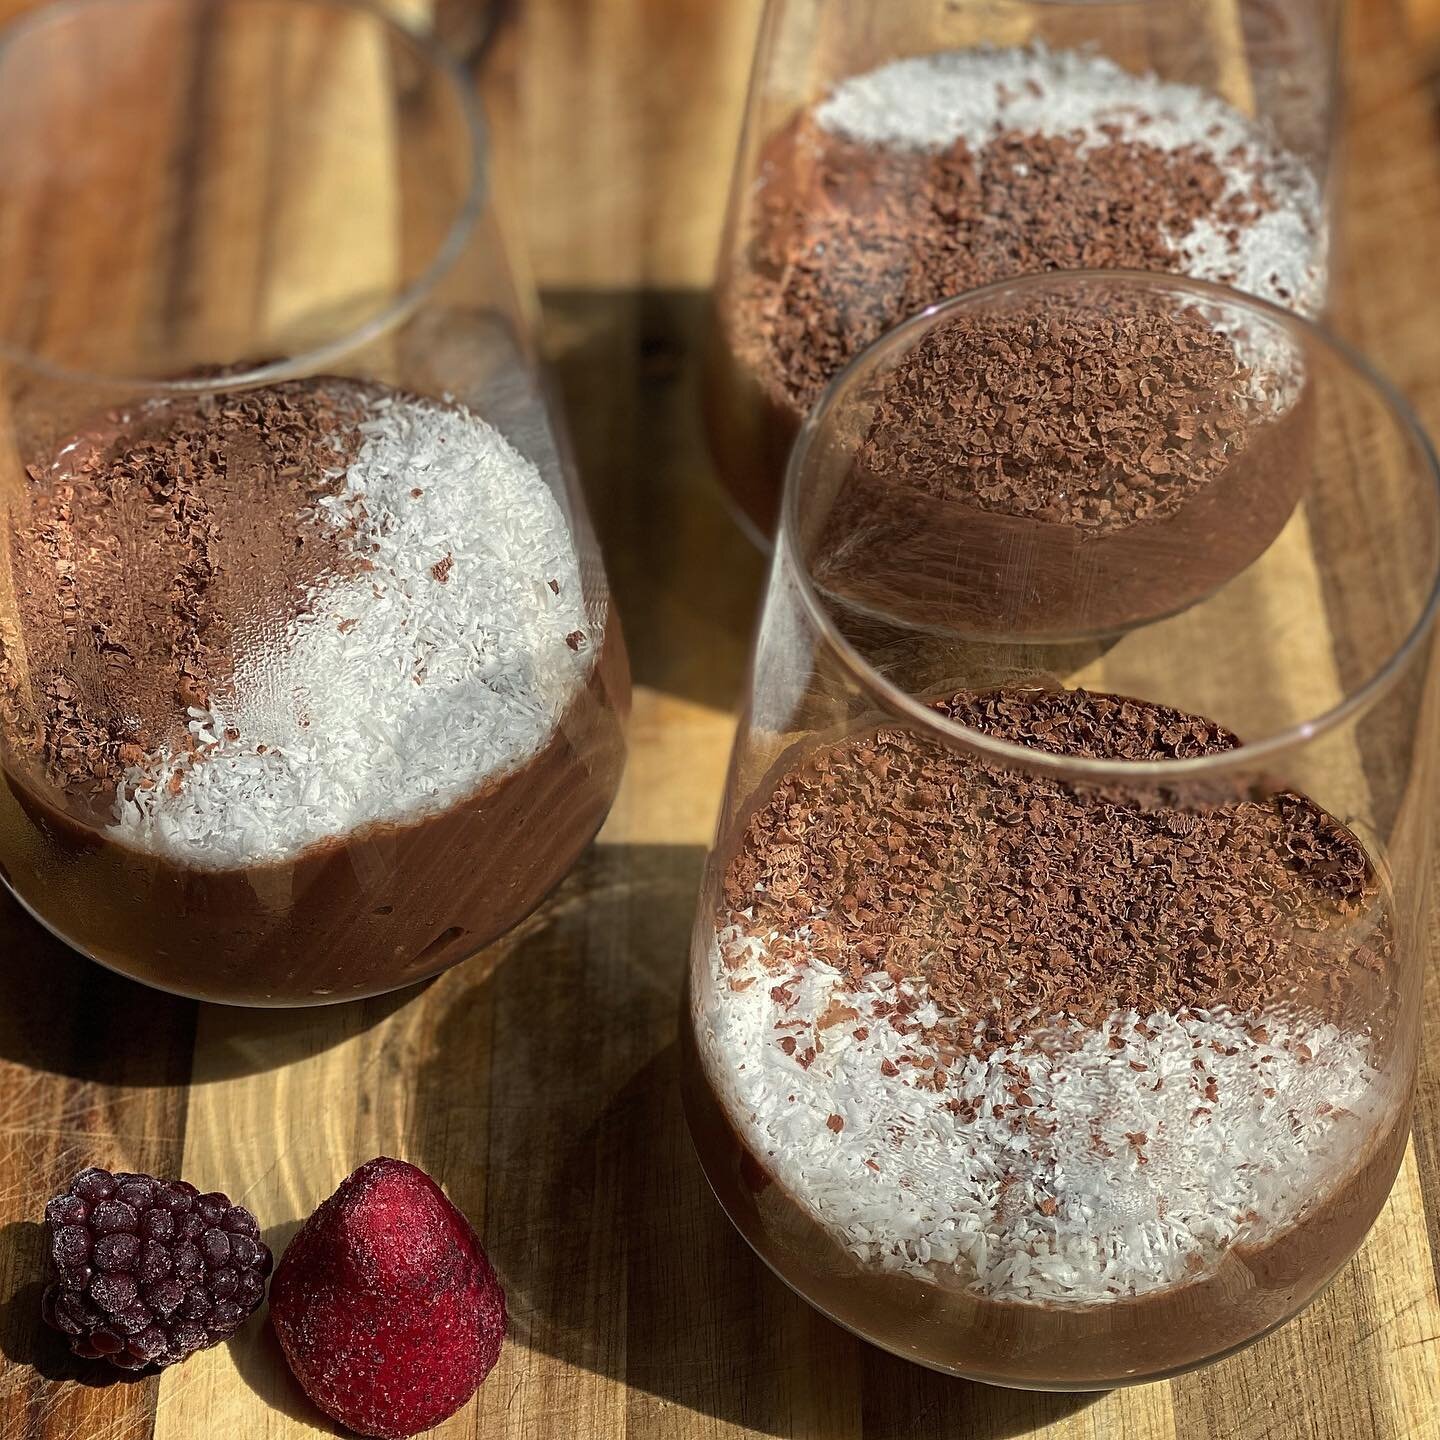 A Chocolate mousse recipe that you MUST try... its vegan and celiac disease friendly!!! Its also high in fiber, antioxidants and all you need is a blender or food processor along with:

- 3/4 cup chia seeds
- 2 1/4 cups almond milk 
- 1/2 cup cacao p